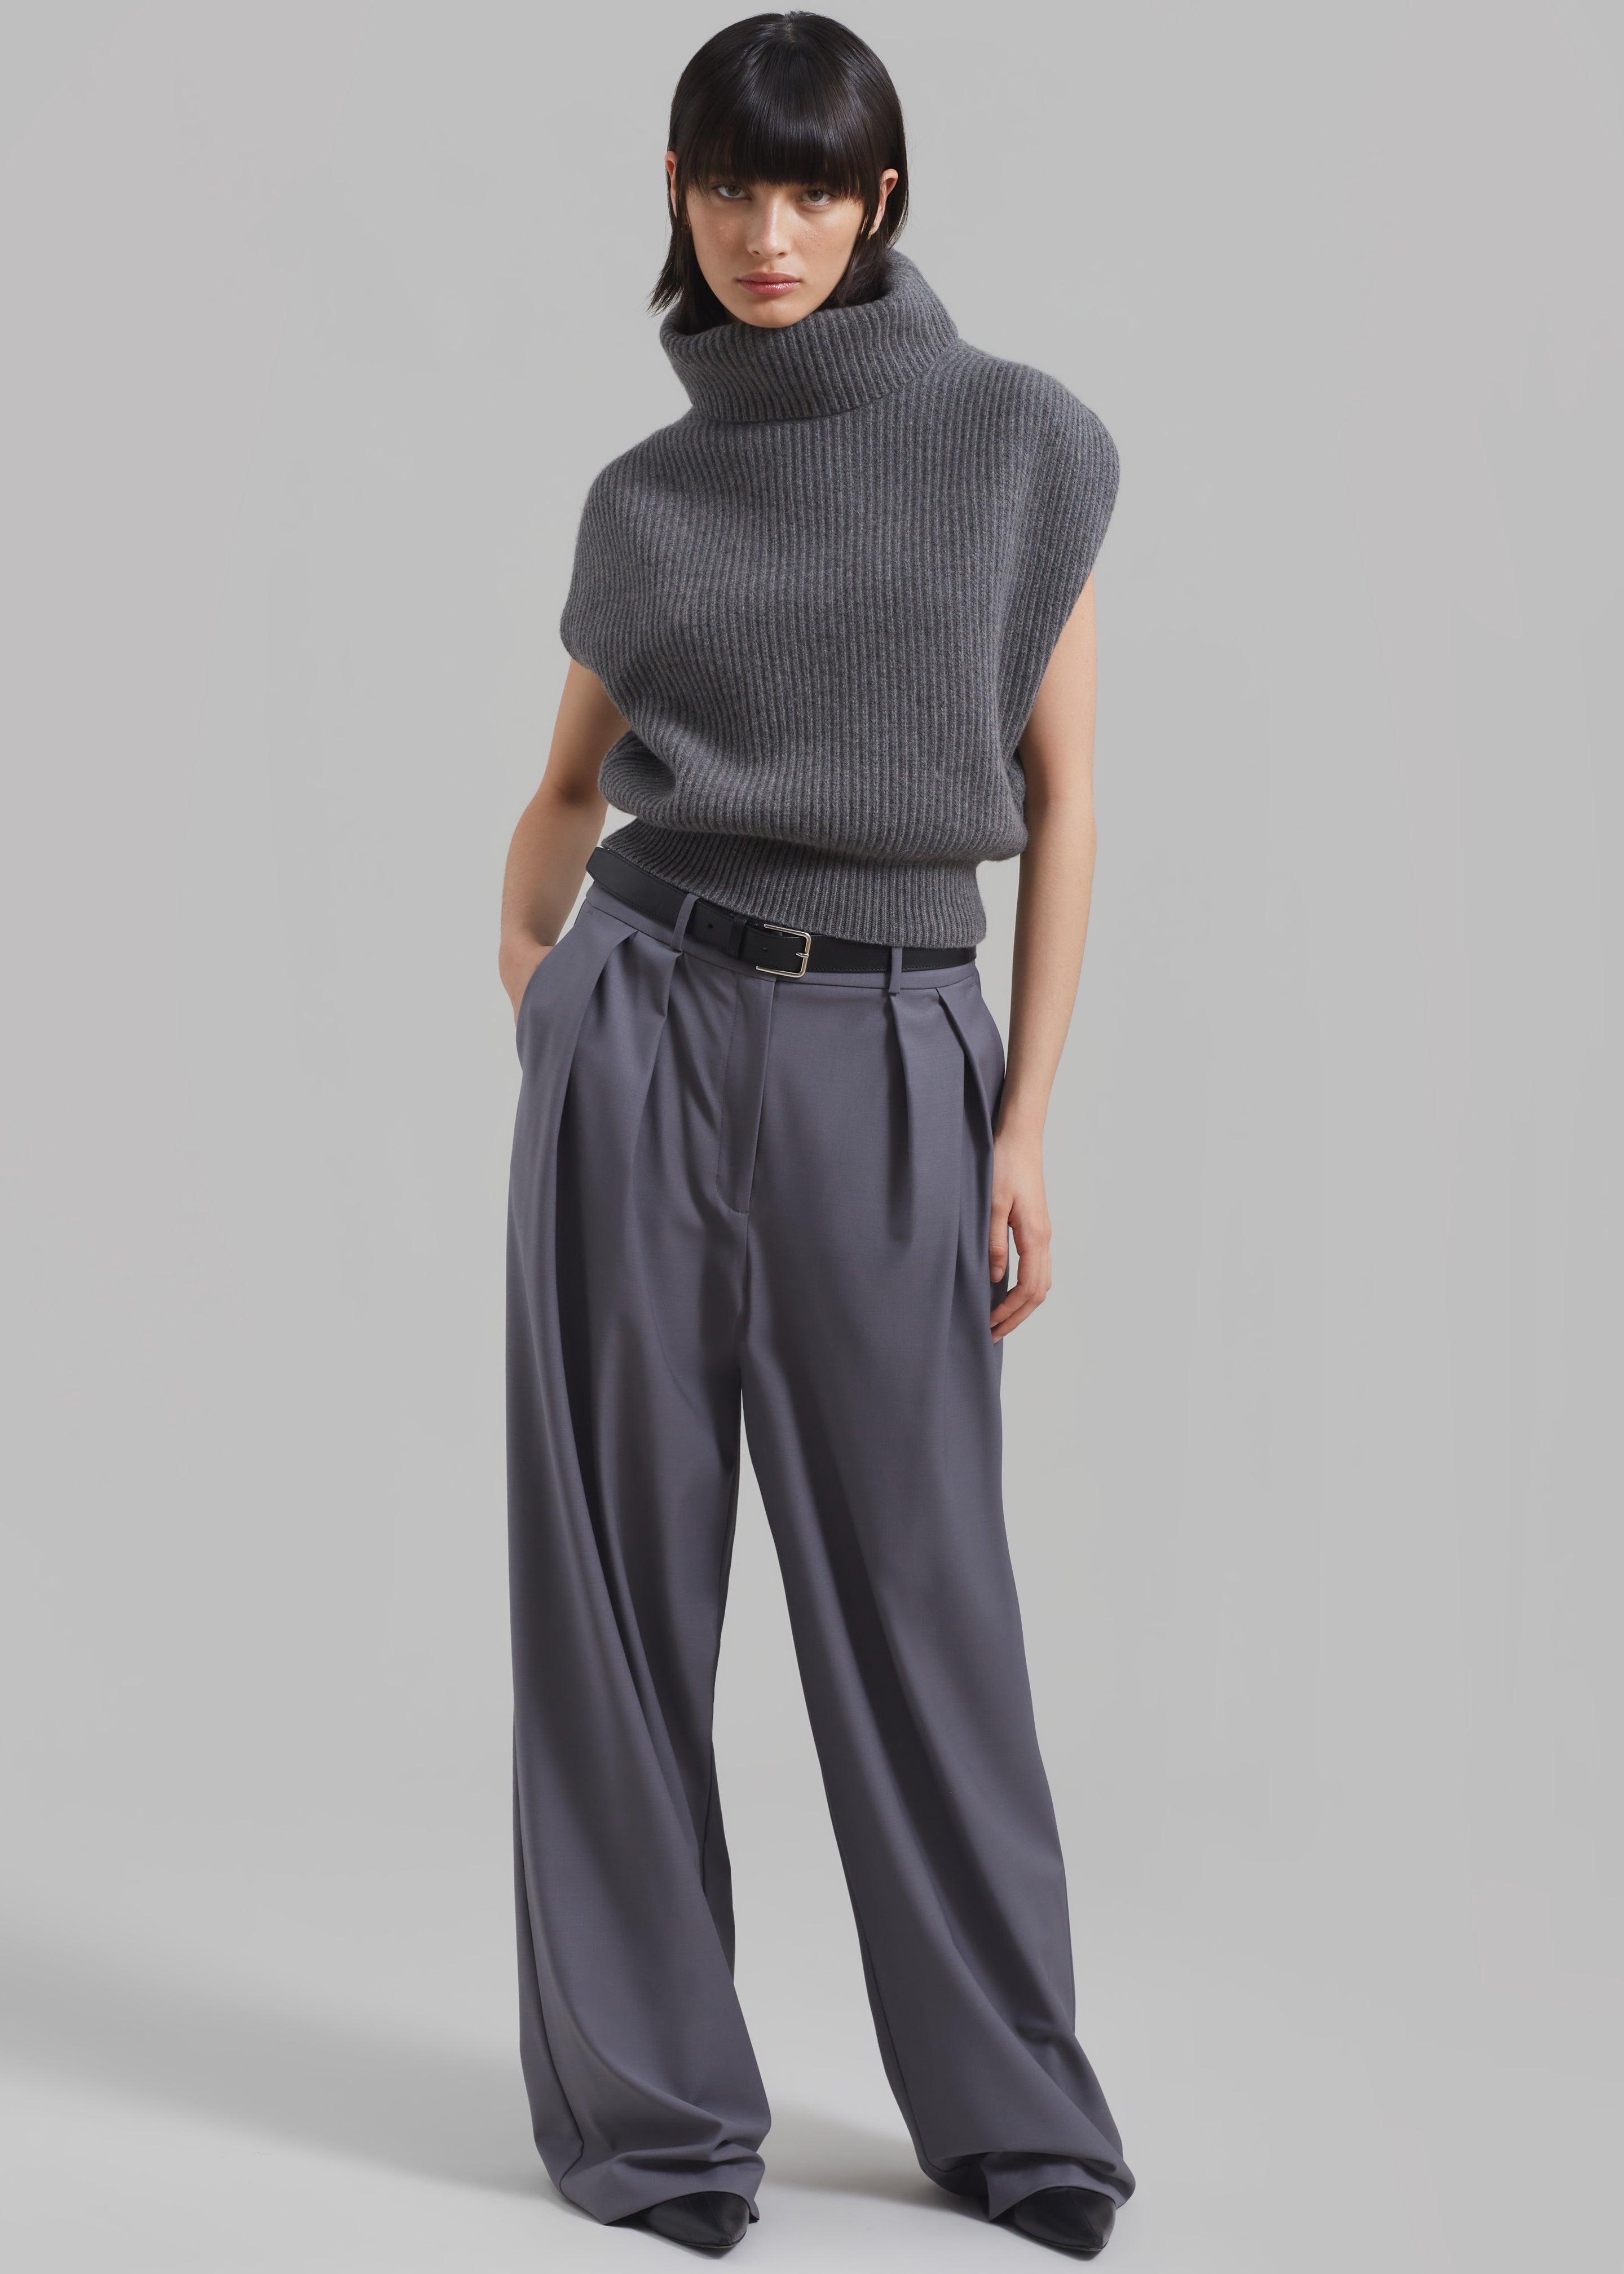 Ripley Pleated Trousers - Grey - 7